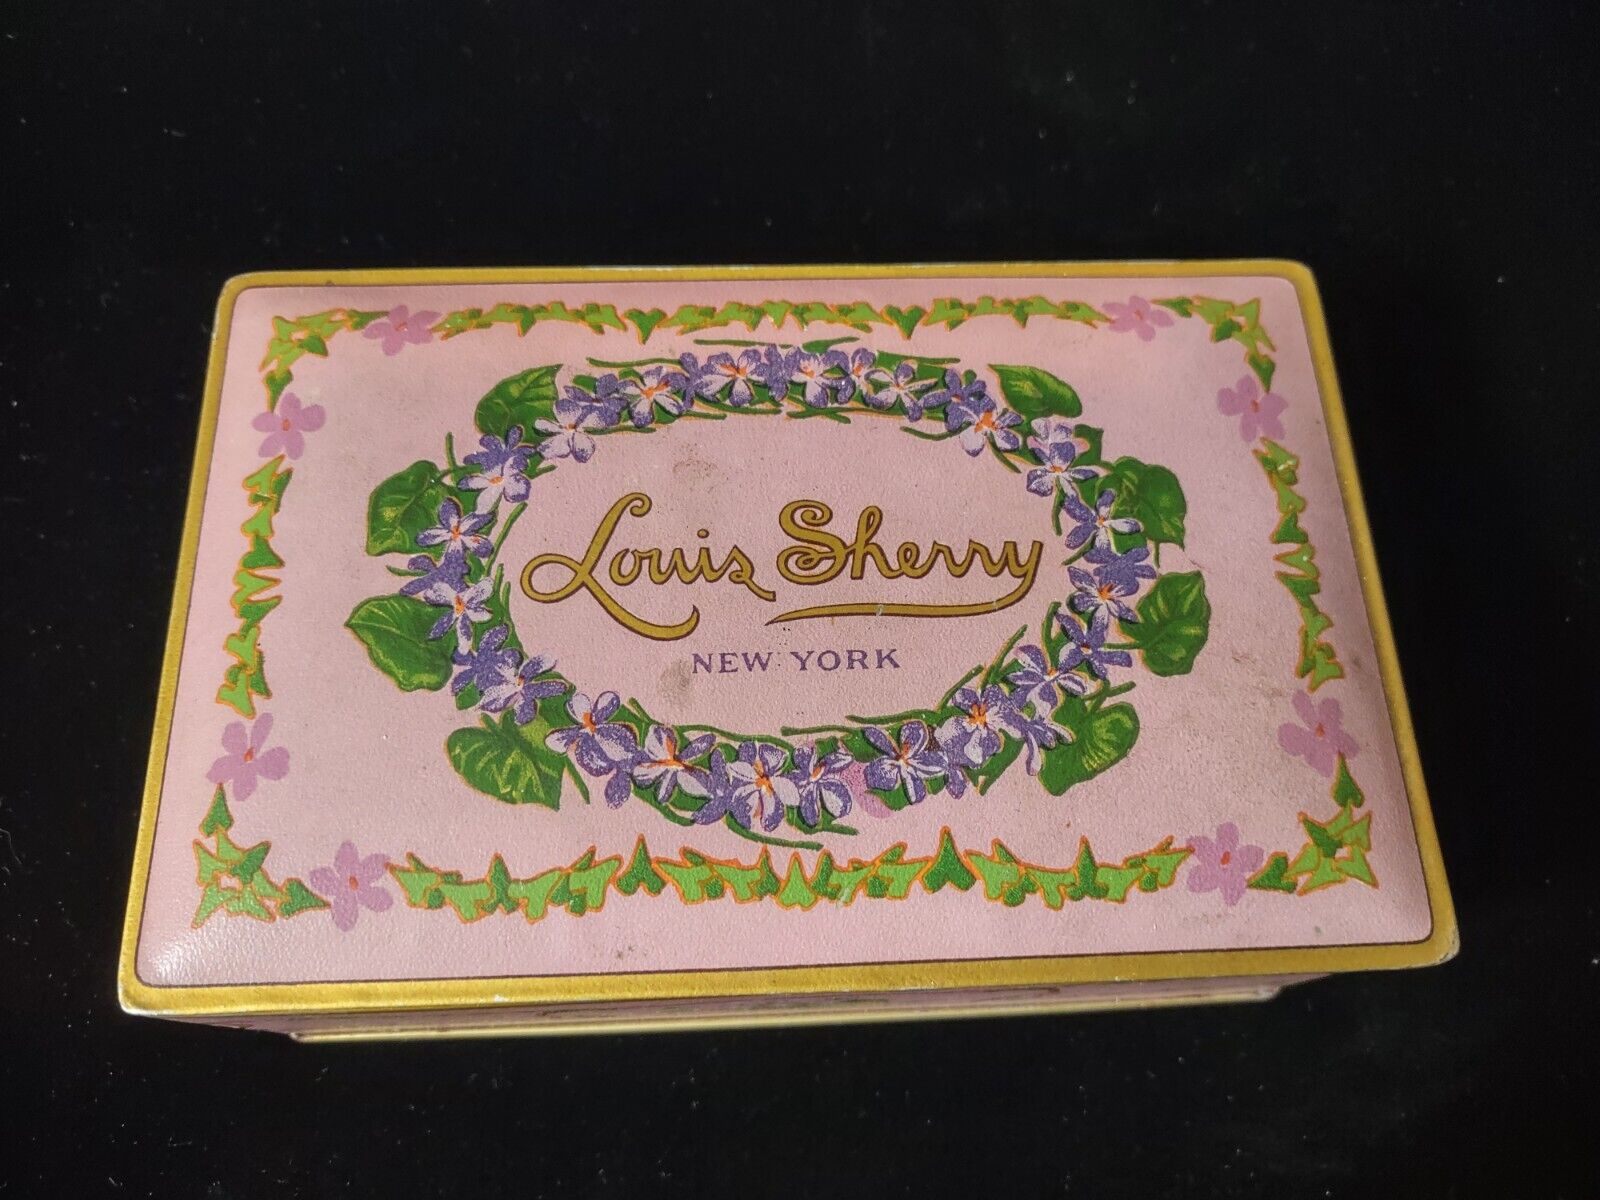 Vintage Louis Sherry New York Tin Litho Pink Candy Box by Canco, 6.25x 4x 2.25\